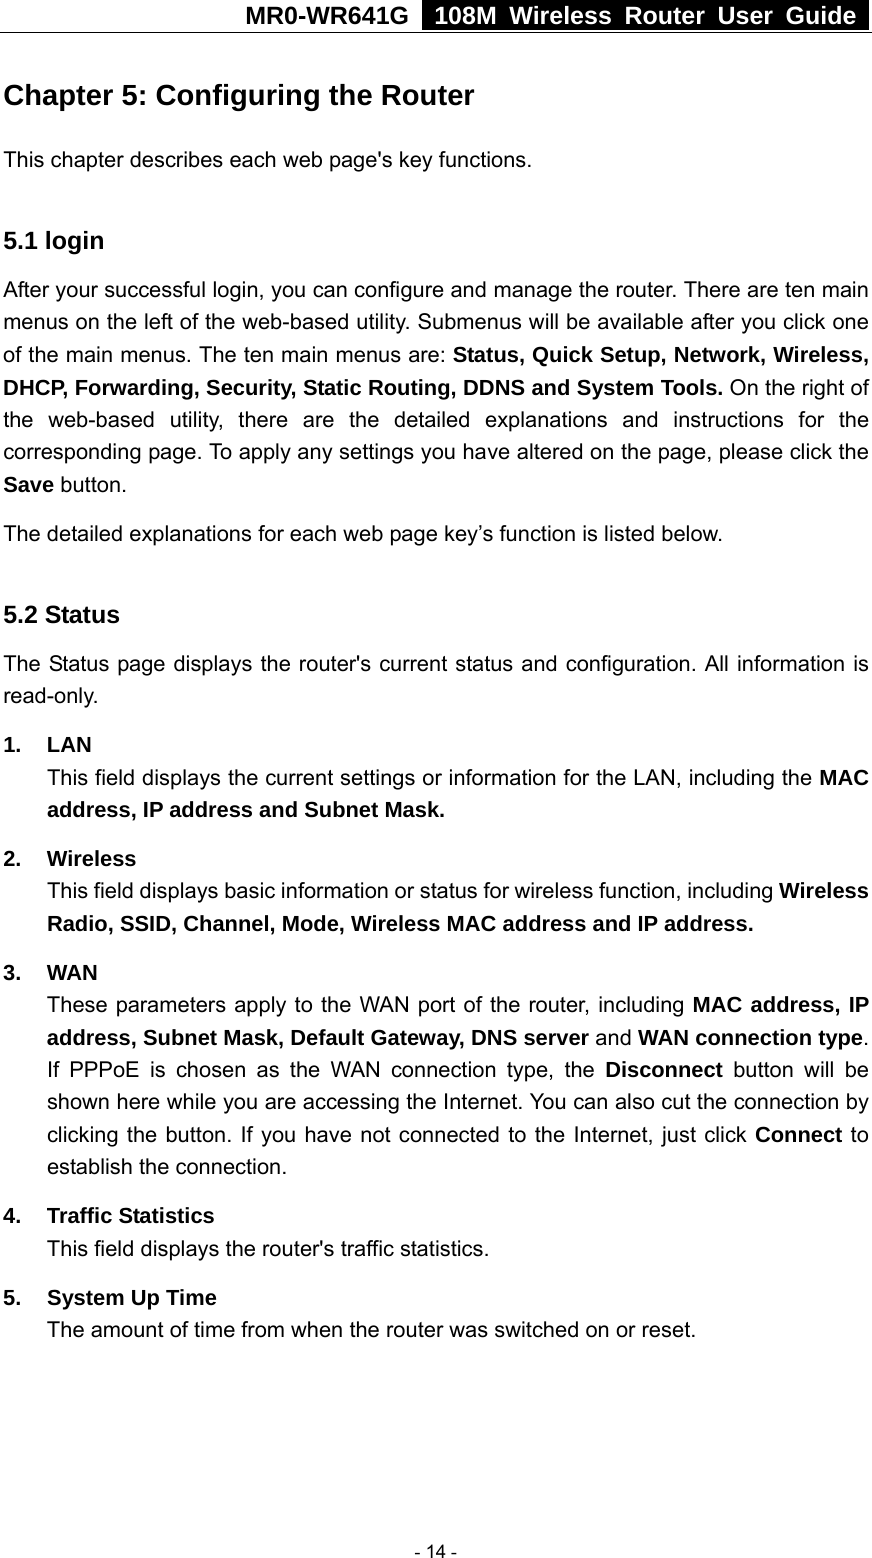 MR0-WR641G   108M Wireless Router User Guide  Chapter 5: Configuring the Router This chapter describes each web page&apos;s key functions.  5.1 login   After your successful login, you can configure and manage the router. There are ten main menus on the left of the web-based utility. Submenus will be available after you click one of the main menus. The ten main menus are: Status, Quick Setup, Network, Wireless, DHCP, Forwarding, Security, Static Routing, DDNS and System Tools. On the right of the web-based utility, there are the detailed explanations and instructions for the corresponding page. To apply any settings you have altered on the page, please click the Save button.   The detailed explanations for each web page key’s function is listed below.    5.2 Status The Status page displays the router&apos;s current status and configuration. All information is read-only. 1. LAN This field displays the current settings or information for the LAN, including the MAC address, IP address and Subnet Mask. 2. Wireless This field displays basic information or status for wireless function, including Wireless Radio, SSID, Channel, Mode, Wireless MAC address and IP address. 3. WAN These parameters apply to the WAN port of the router, including MAC address, IP address, Subnet Mask, Default Gateway, DNS server and WAN connection type. If PPPoE is chosen as the WAN connection type, the Disconnect button will be shown here while you are accessing the Internet. You can also cut the connection by clicking the button. If you have not connected to the Internet, just click Connect to establish the connection. 4. Traffic Statistics This field displays the router&apos;s traffic statistics.   5.  System Up Time The amount of time from when the router was switched on or reset.   - 14 - 